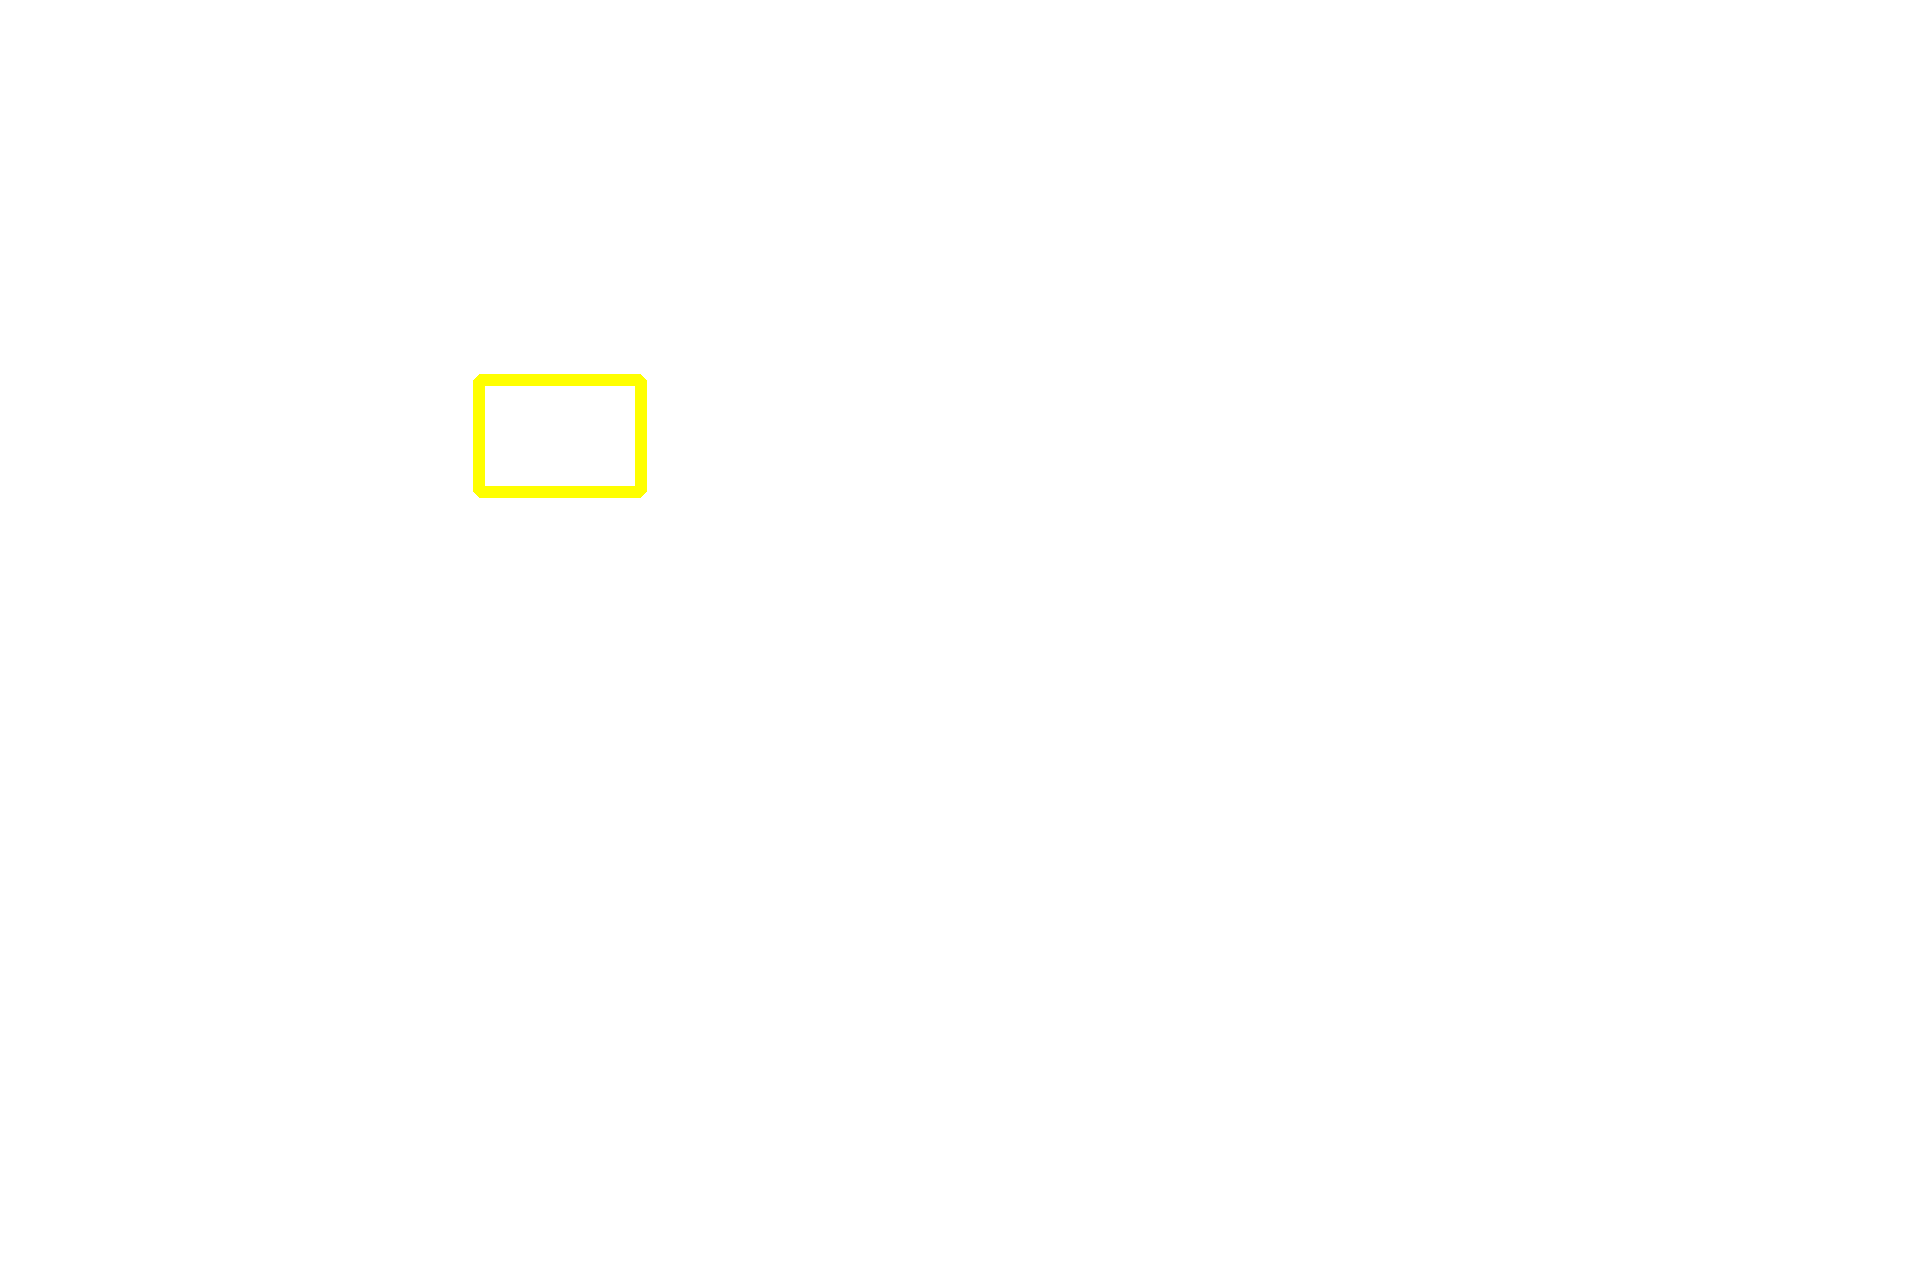 Next image > <p>The electron micrograph in the next image shows the region in the rectangle.</p>
